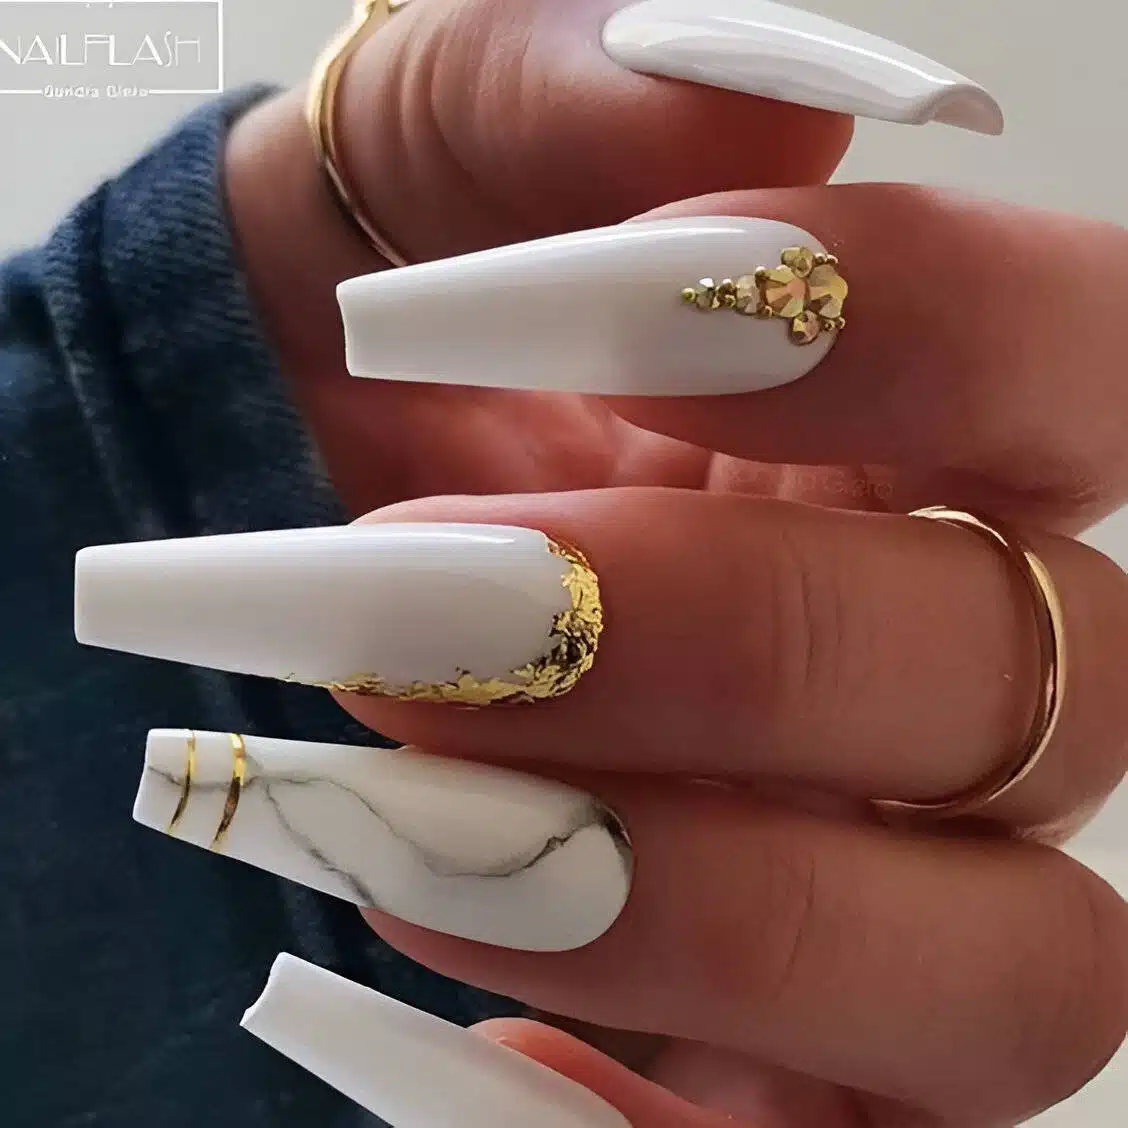 30 Elegant White And Gold Nail Ideas For Chic Ladies - 231